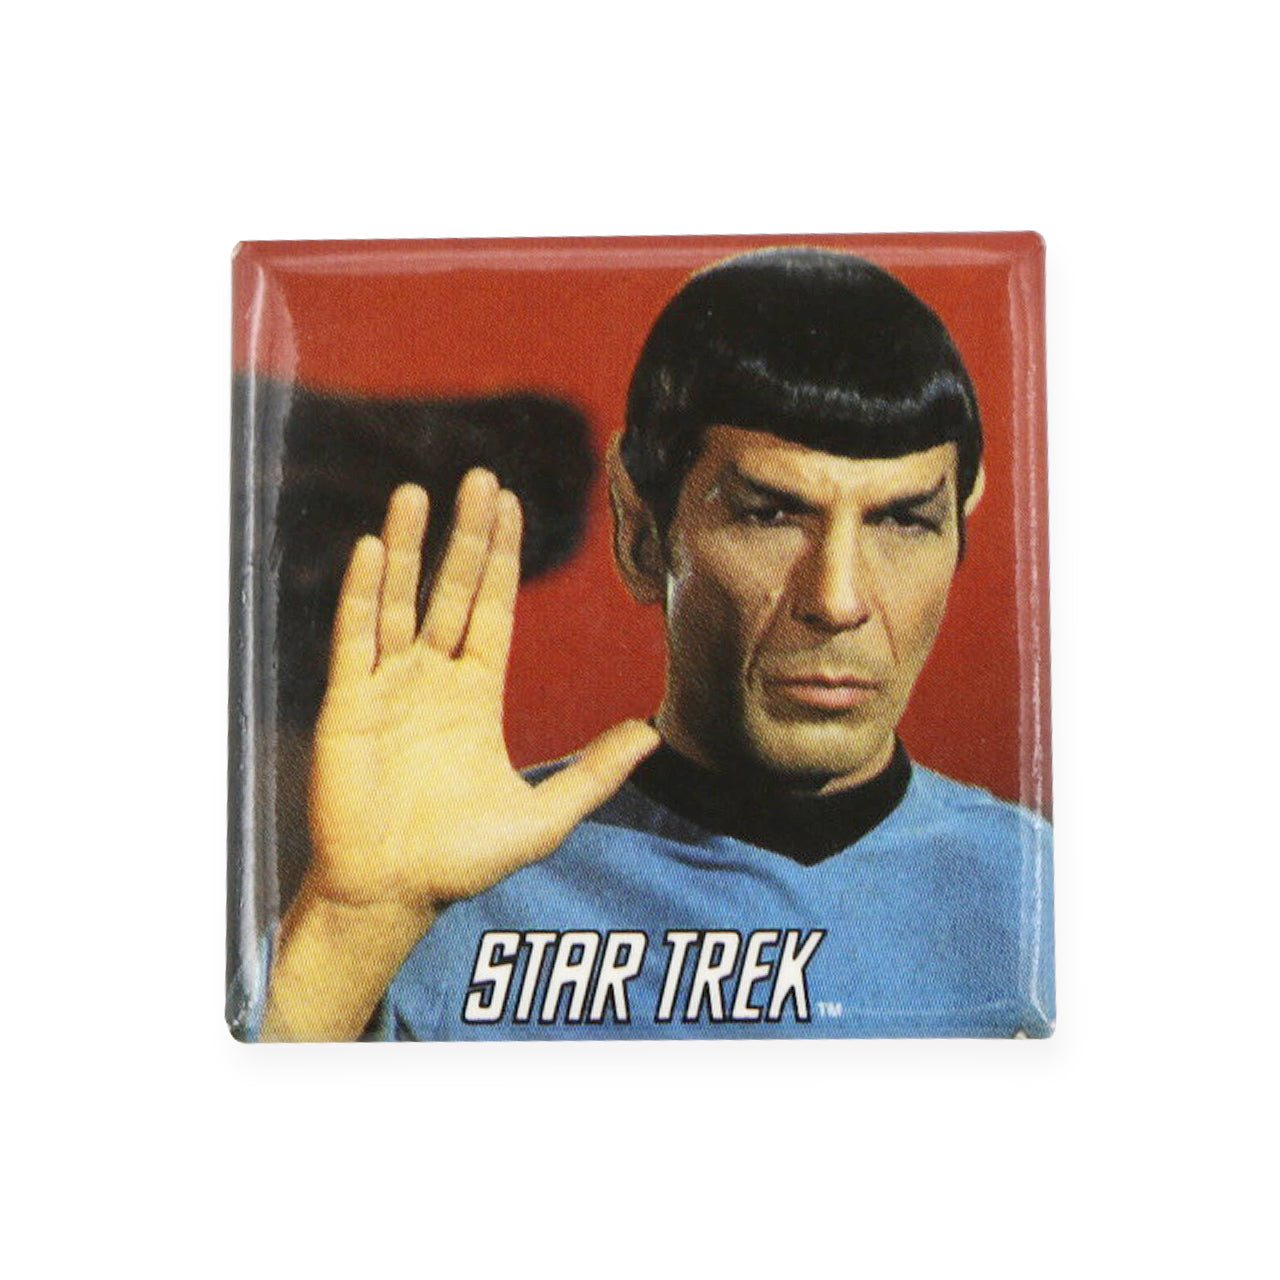 Vintage Live Long and Prosper Pinback Button  Add a little flair to your jacket, backpack or tote with this Vintage Live Long and Prosper Pinback Button! This button depicts Spock making the Vulcan hand gesture for "live long and prosper".  Measures 1.5 x 1.5 inches.